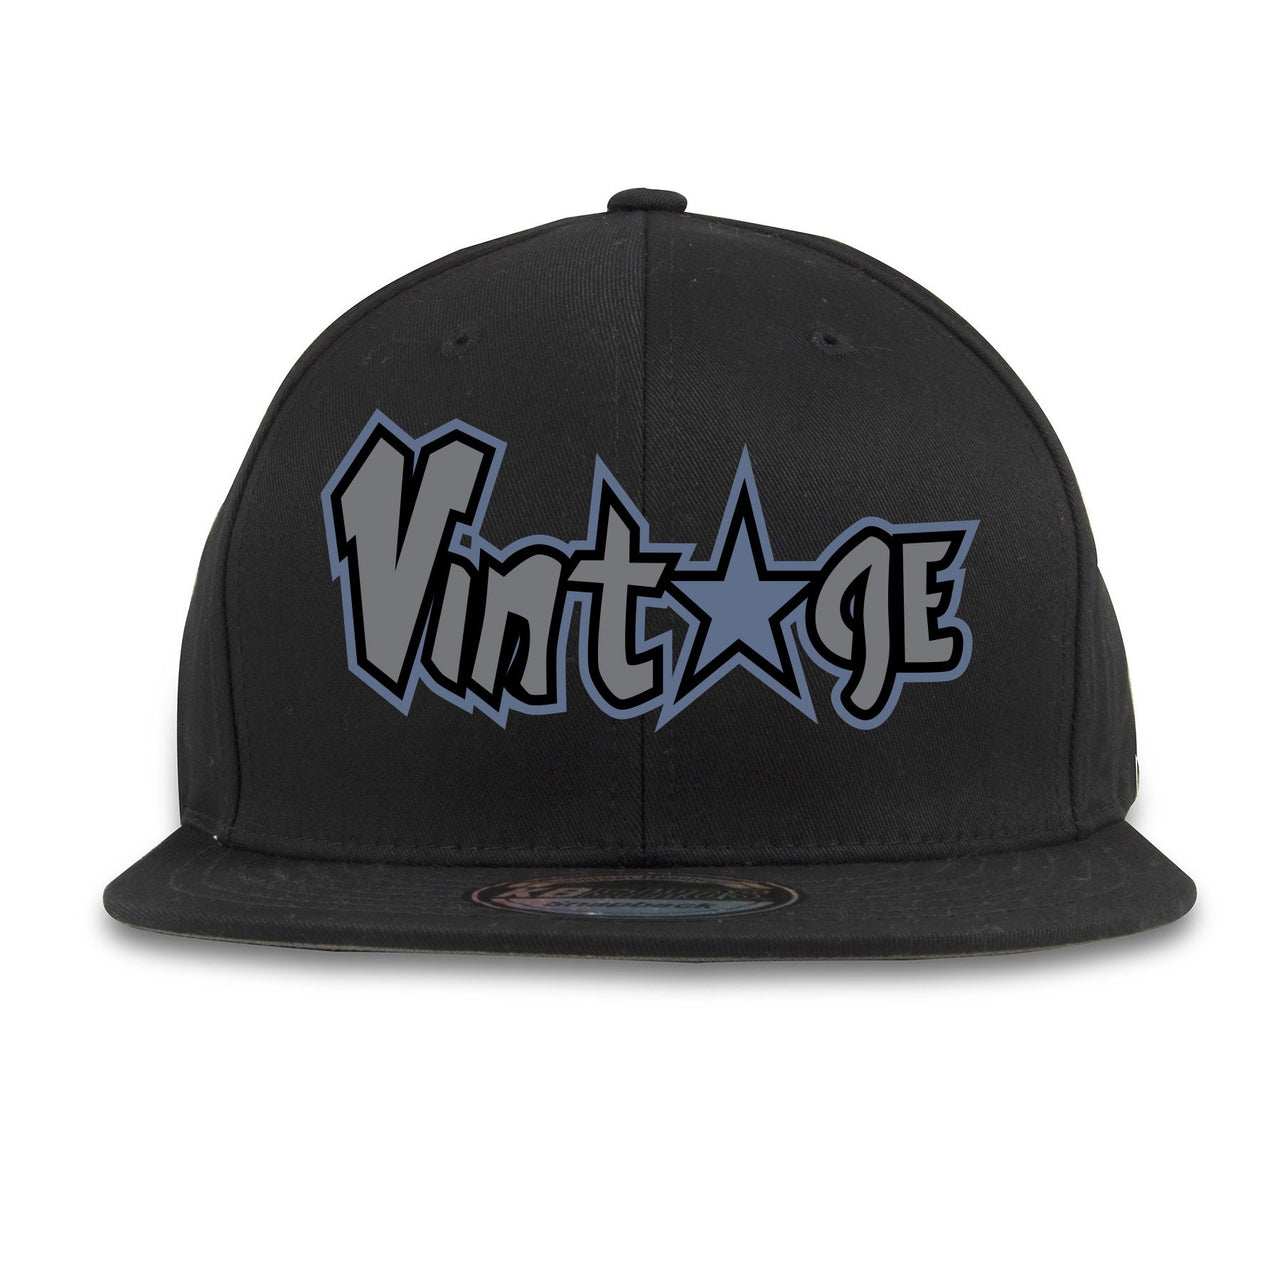 Cap and Gown 13s Snapback | Vintage Star Logo, Black